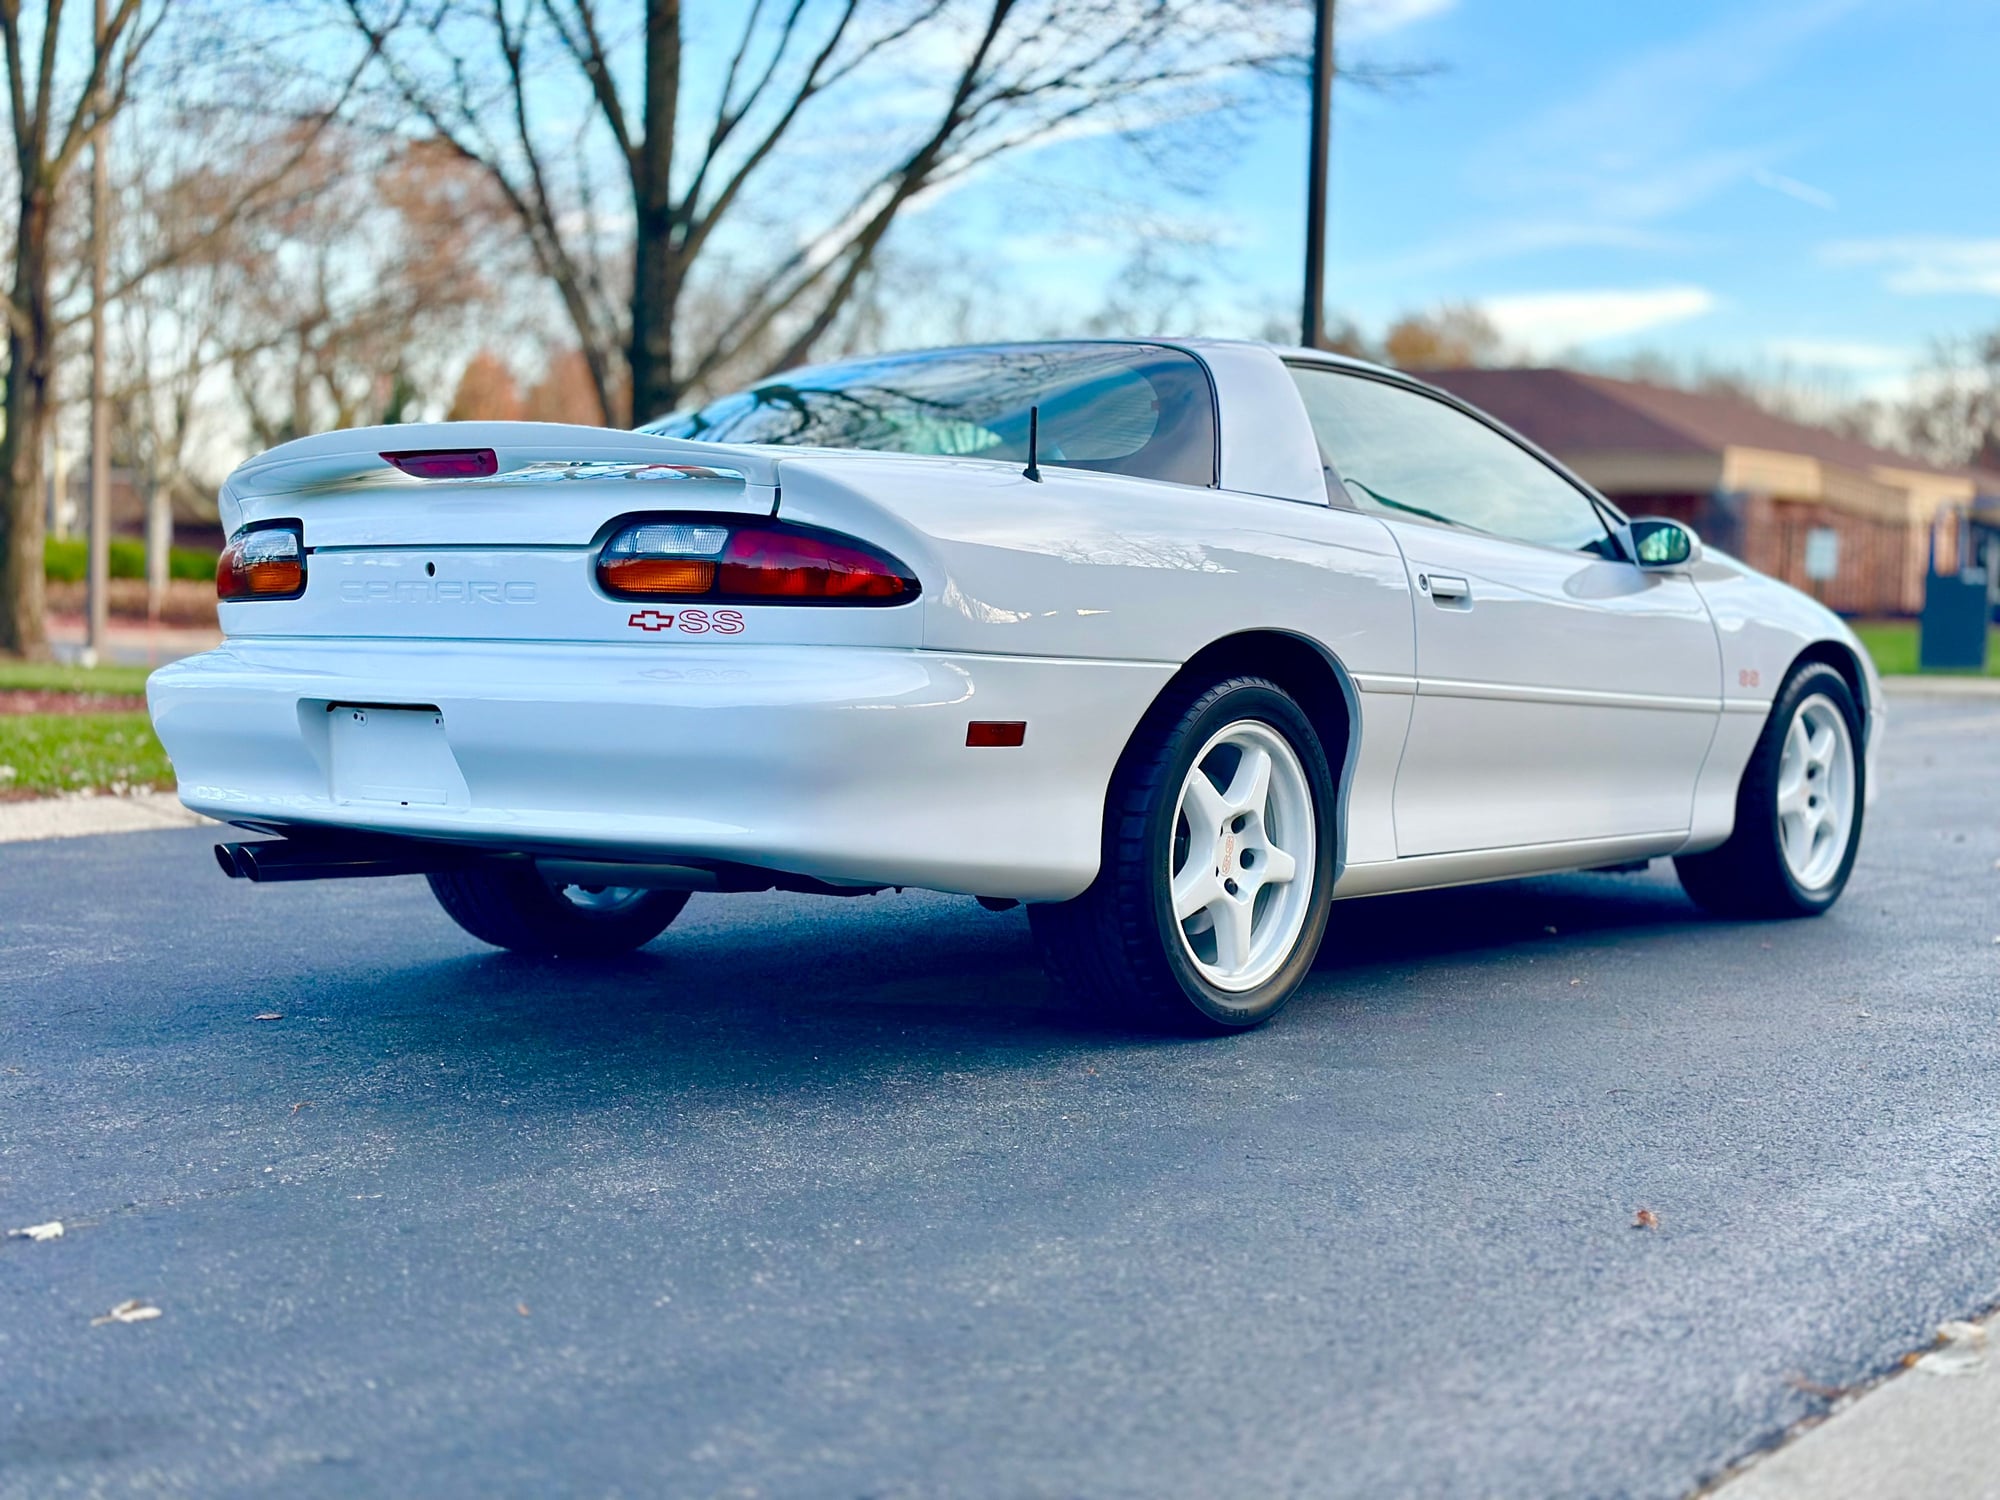 1997 Chevrolet Camaro - 1997 Camaro SS Anniversary Hardtop Manual No Mods 17k miles - Used - VIN 2G1FP22P2V2129500 - 17,300 Miles - 8 cyl - 2WD - Manual - Coupe - White - Palos Heights, IL 60463, United States